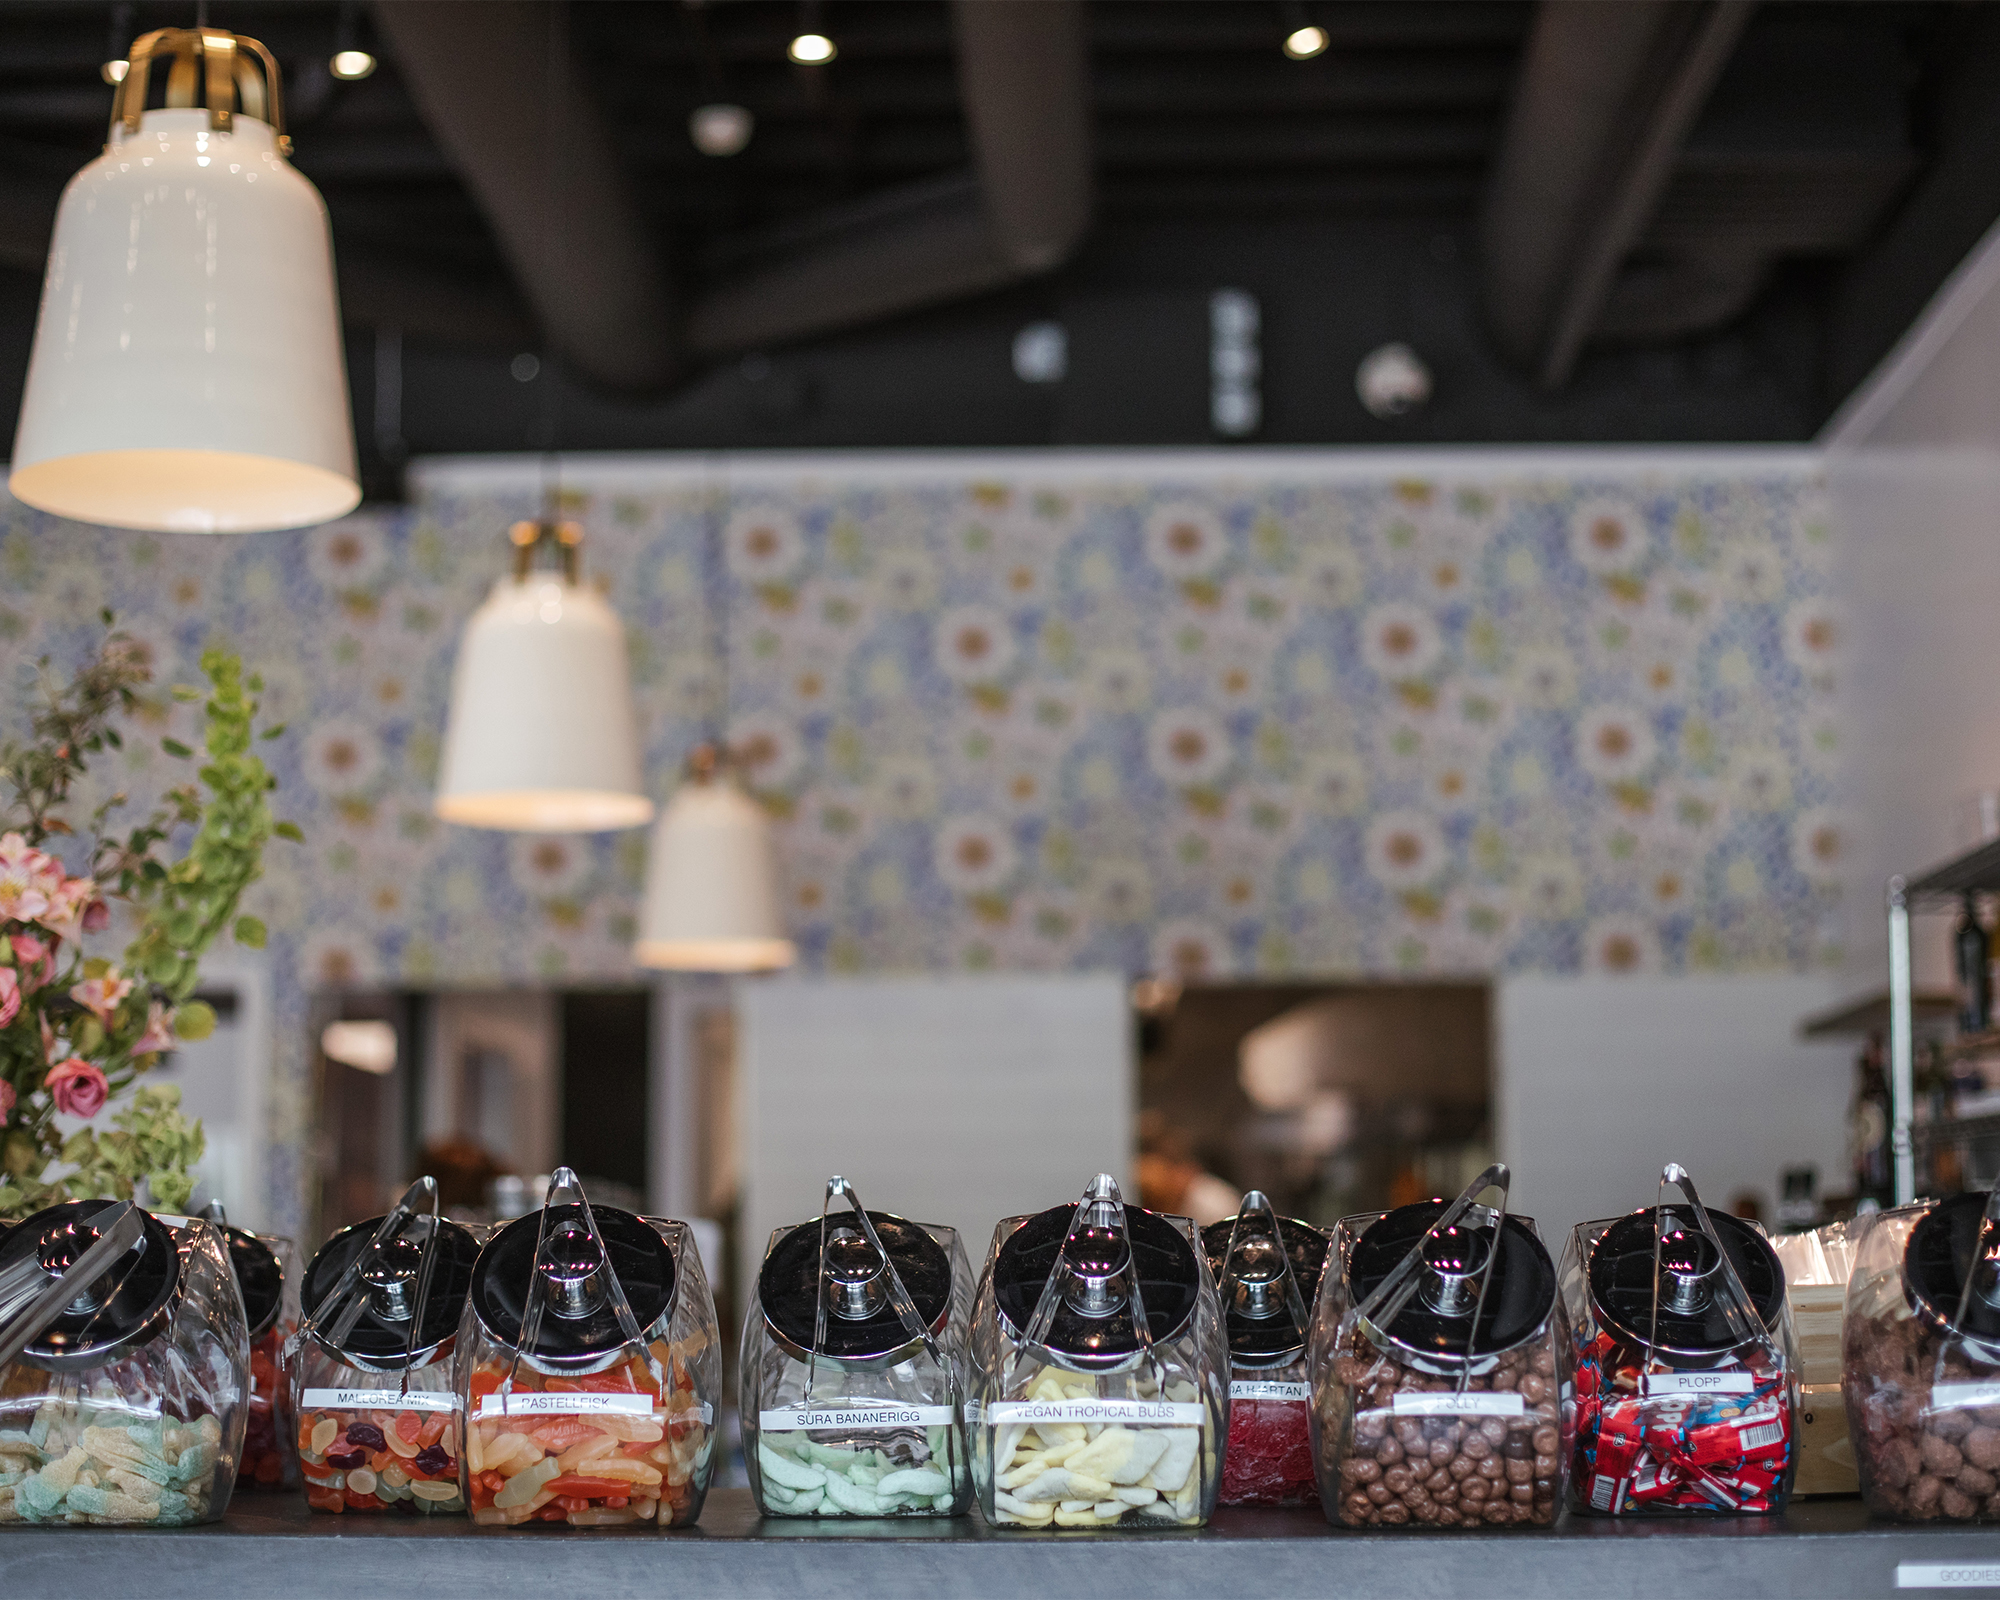 Candy at Stockhome restaurant. Photo: Elise Aileen Photography.